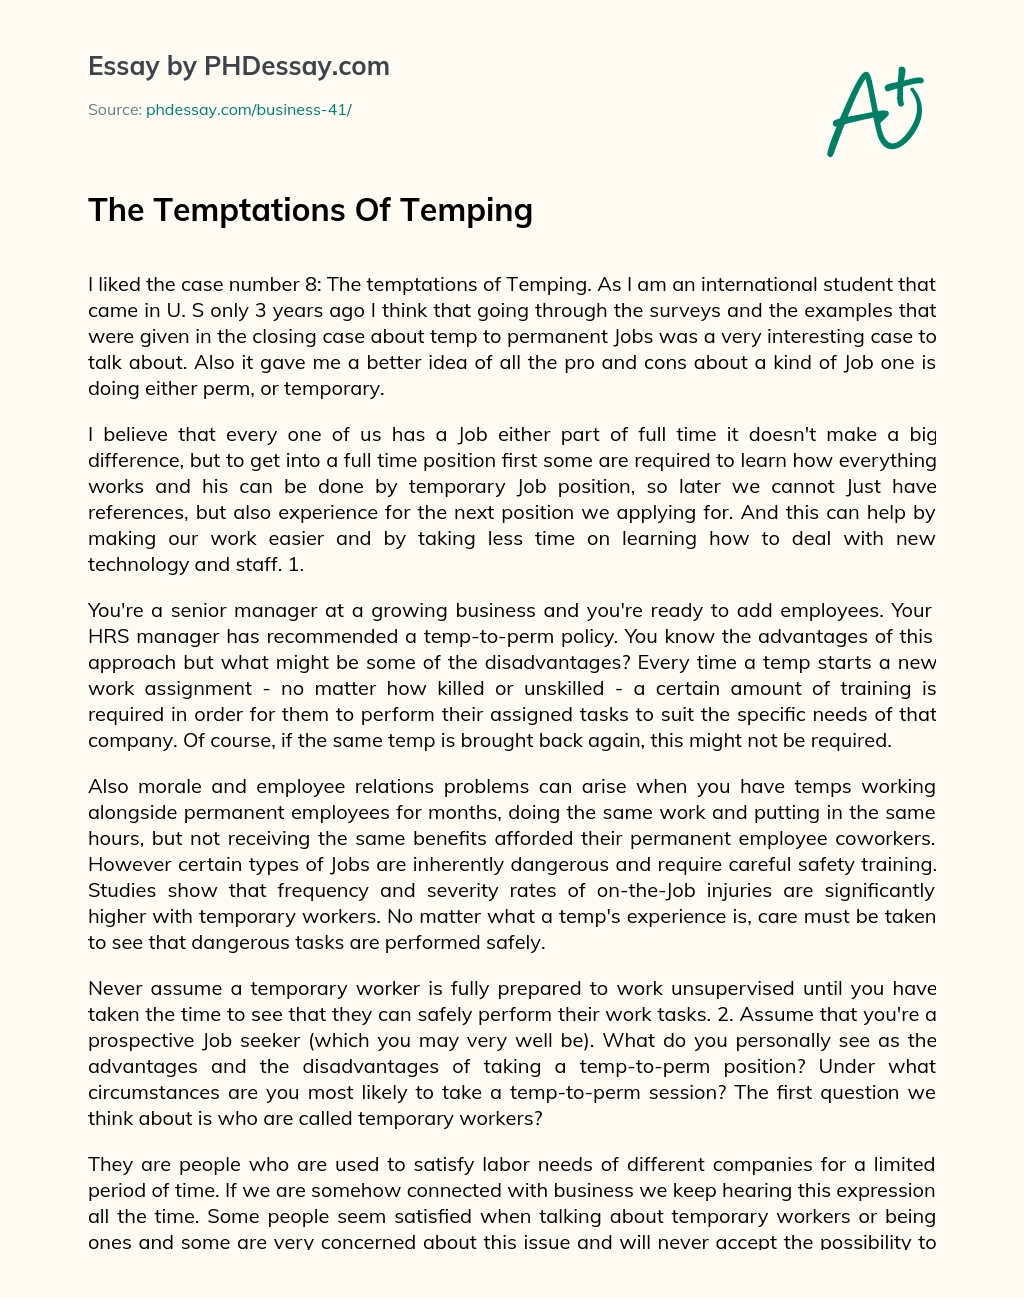 The Temptations Of Temping essay